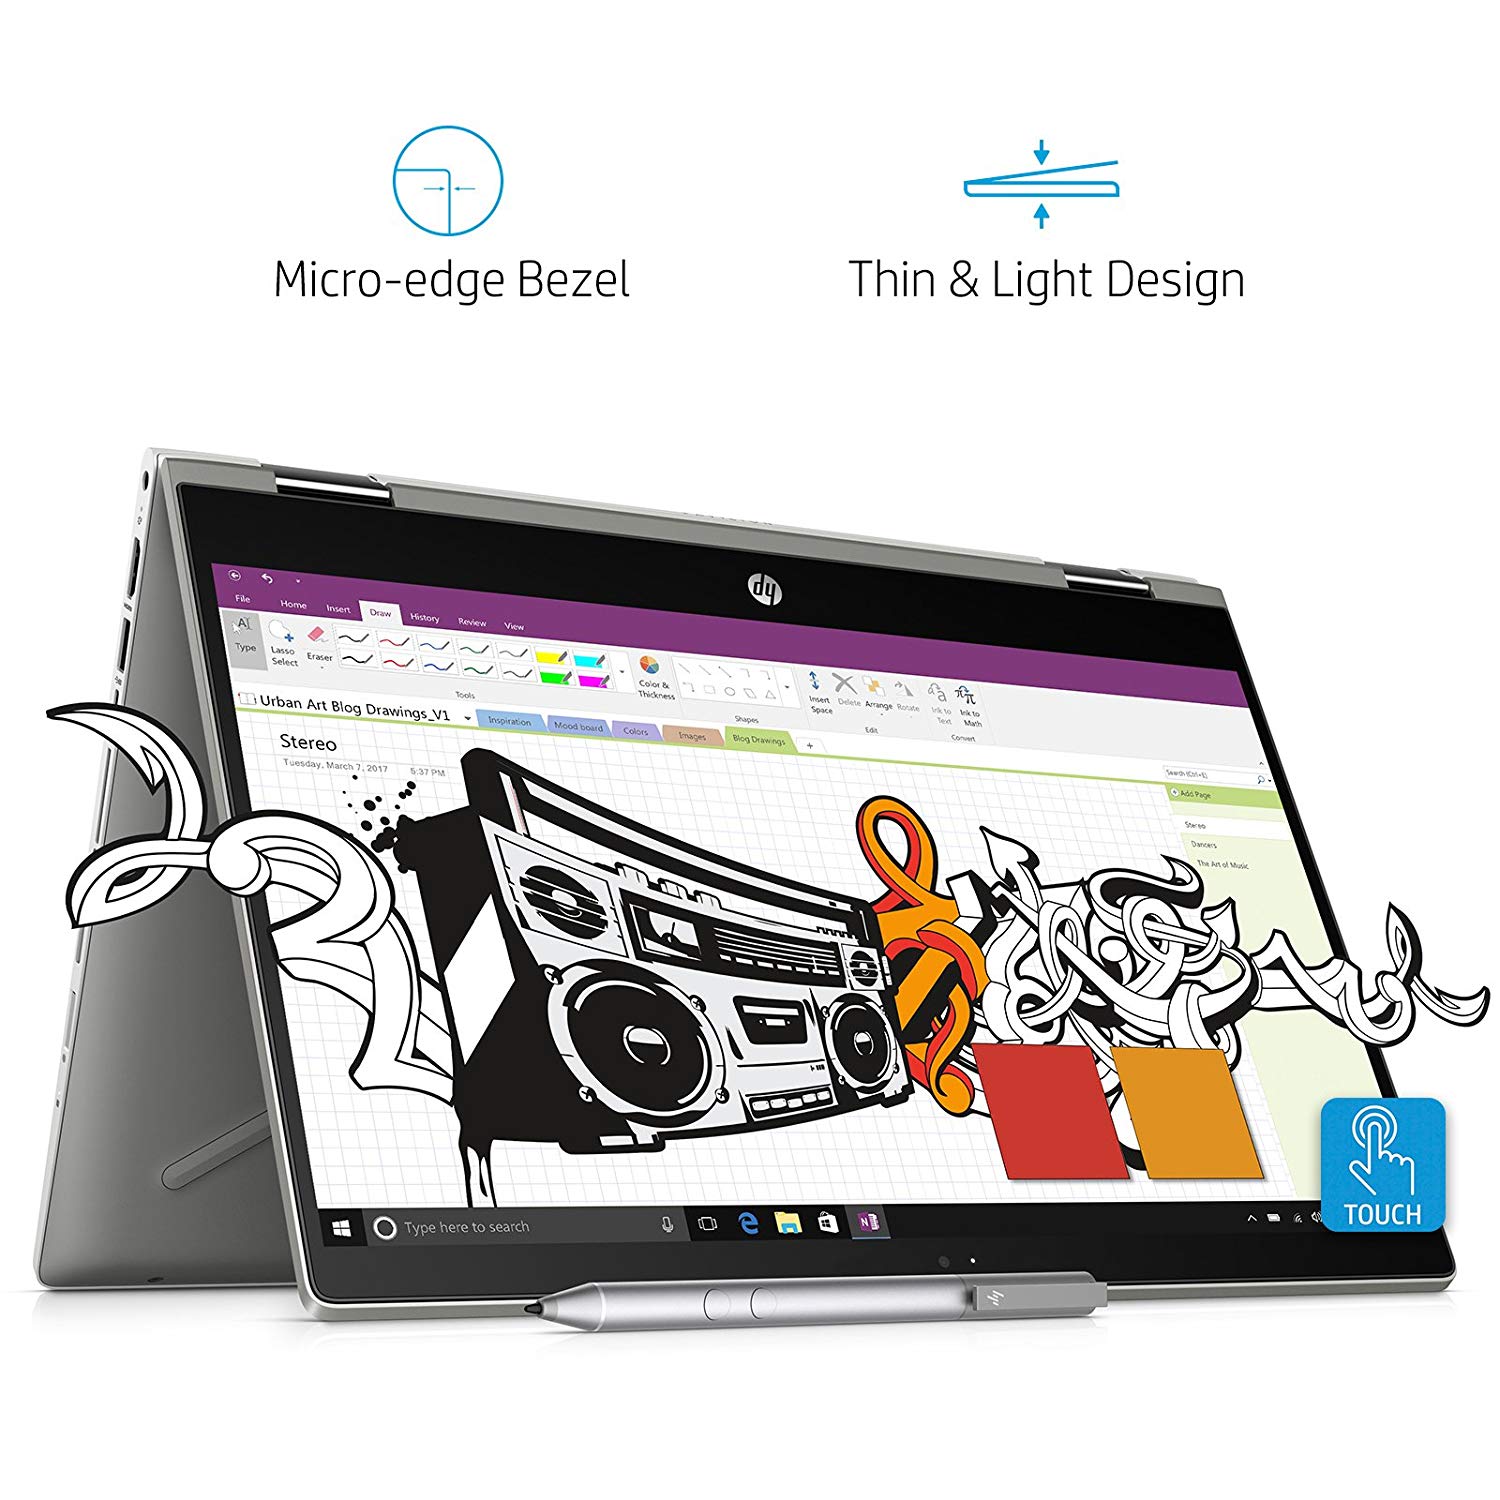 HP Pavilion x360 Convertible 14-cd0078TU 14 inch FHD Slim Laptop with Pen (8th Gen Intel Core i3-8130U/256 GB SSD/4GB RAM/Windows 10 Home/Microsoft Office Home and Student 2016/Integrated Graphics/Type-C), Pale Gold